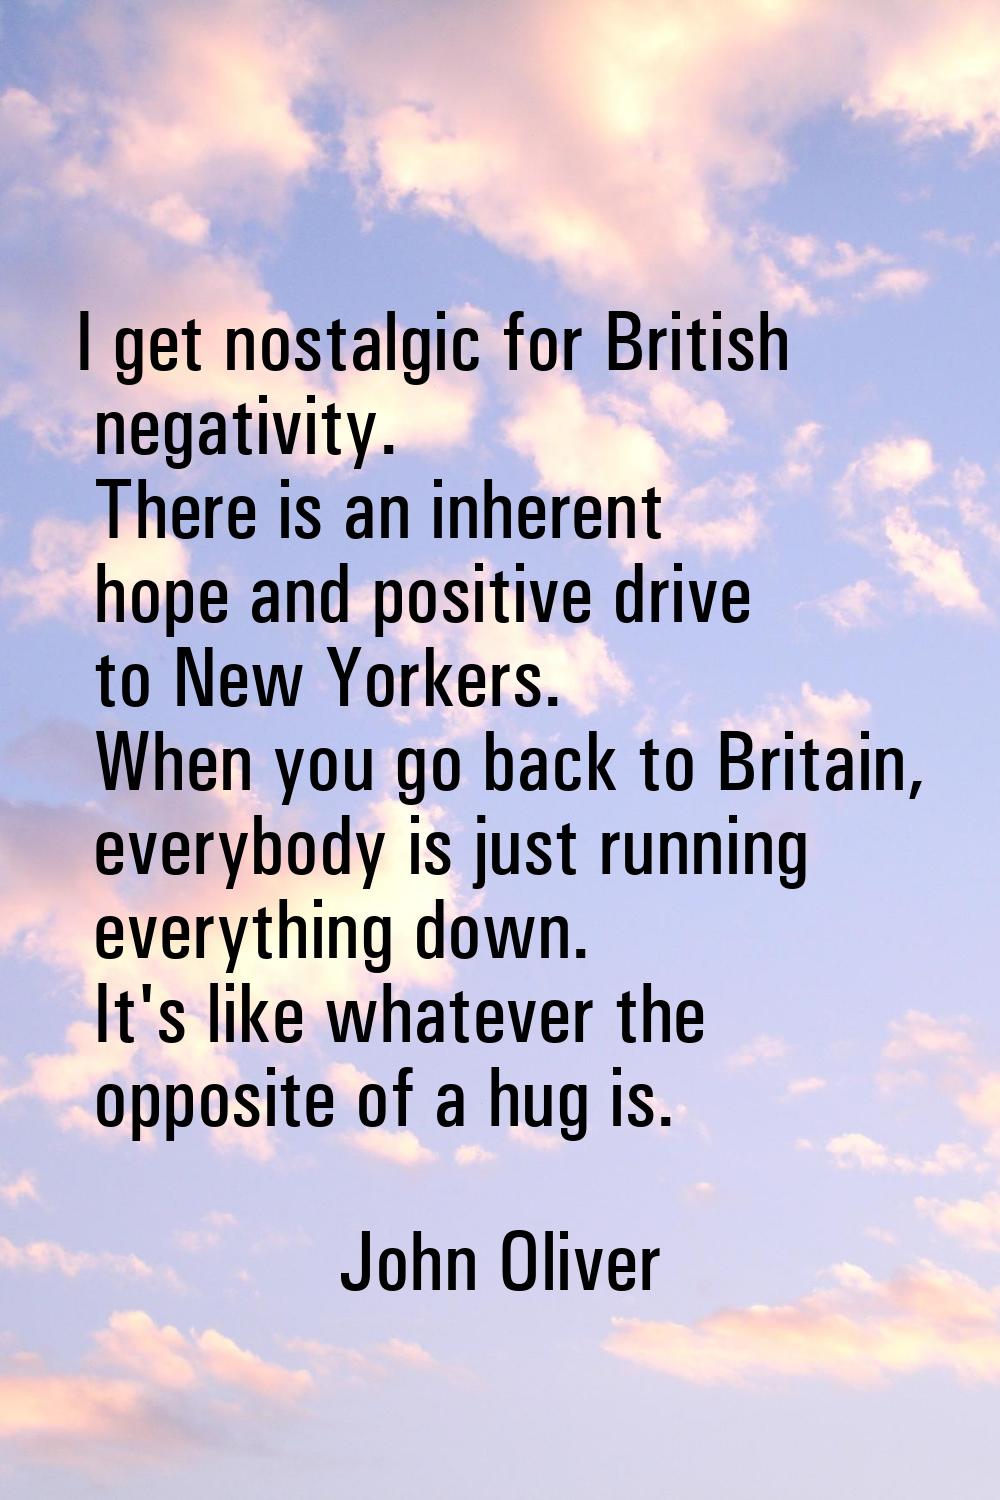 I get nostalgic for British negativity. There is an inherent hope and positive drive to New Yorkers